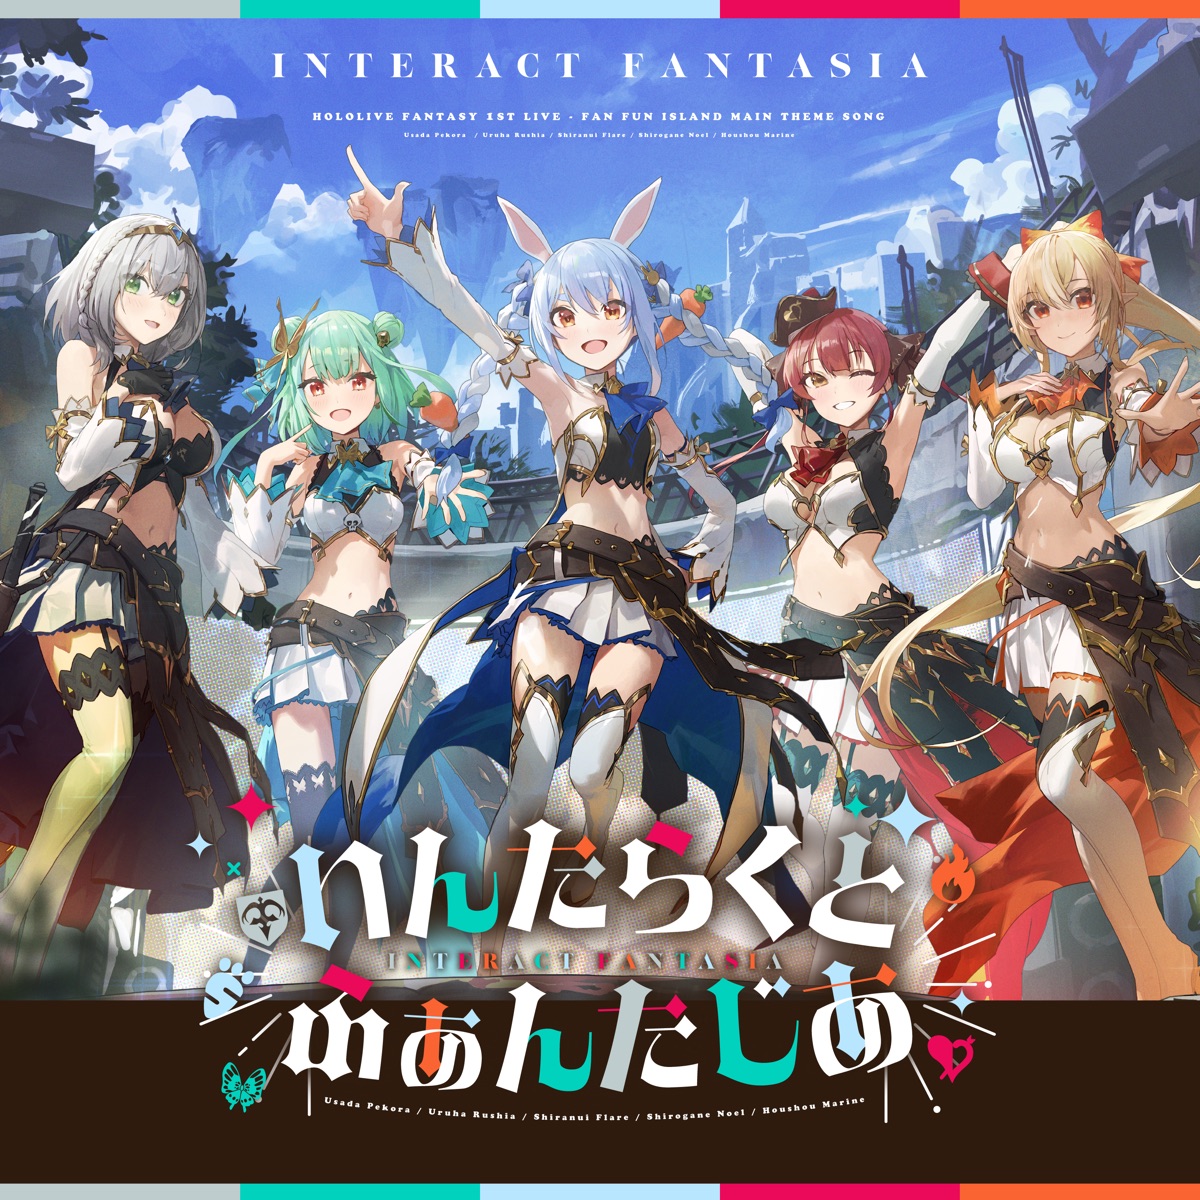 Cover art for『hololive Fantasy - Interact Fantasia』from the release『Interact Fantasia』